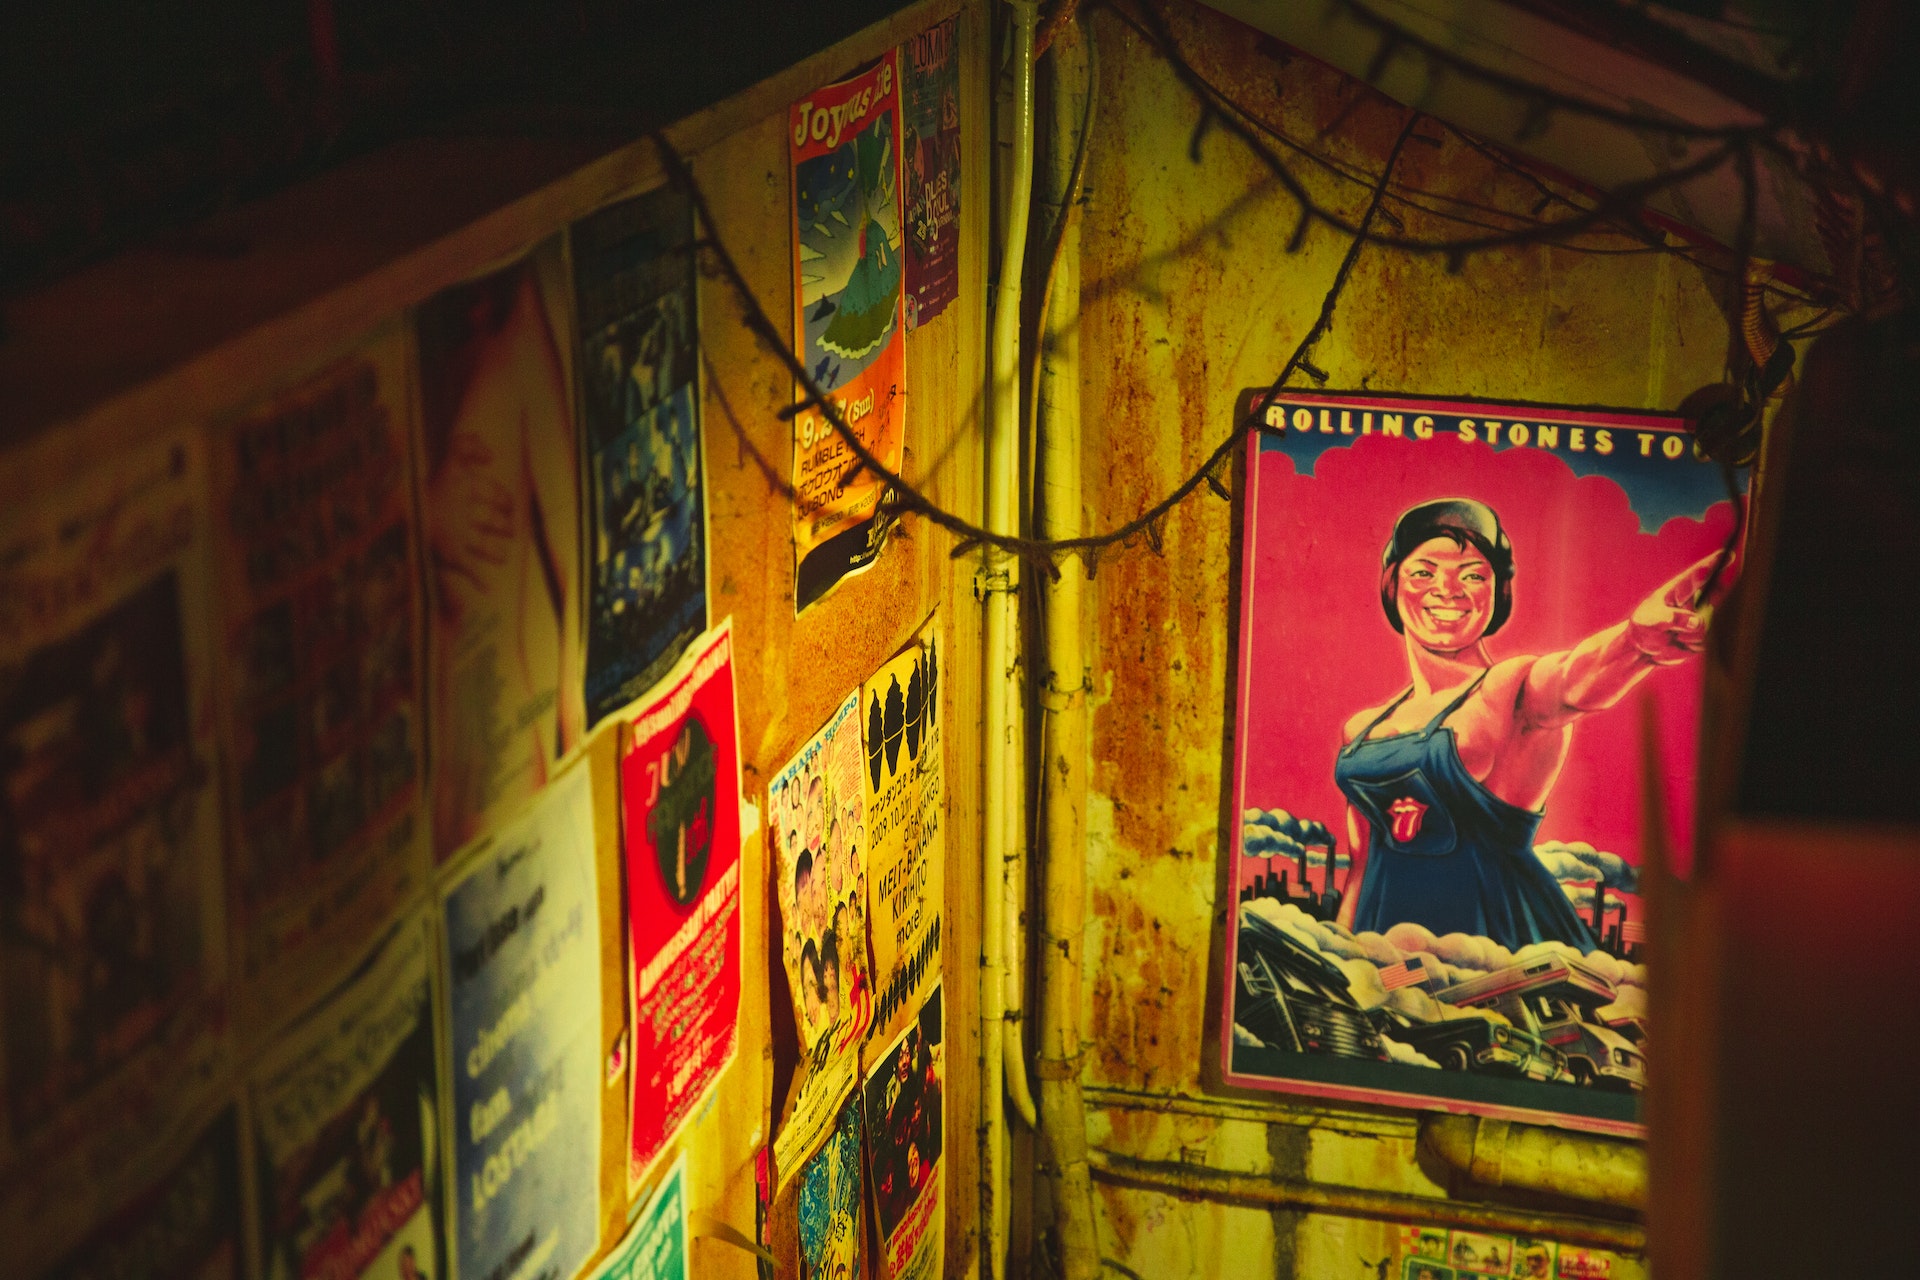 How To Recycle Old Movie Posters in a Quick and Easy Way